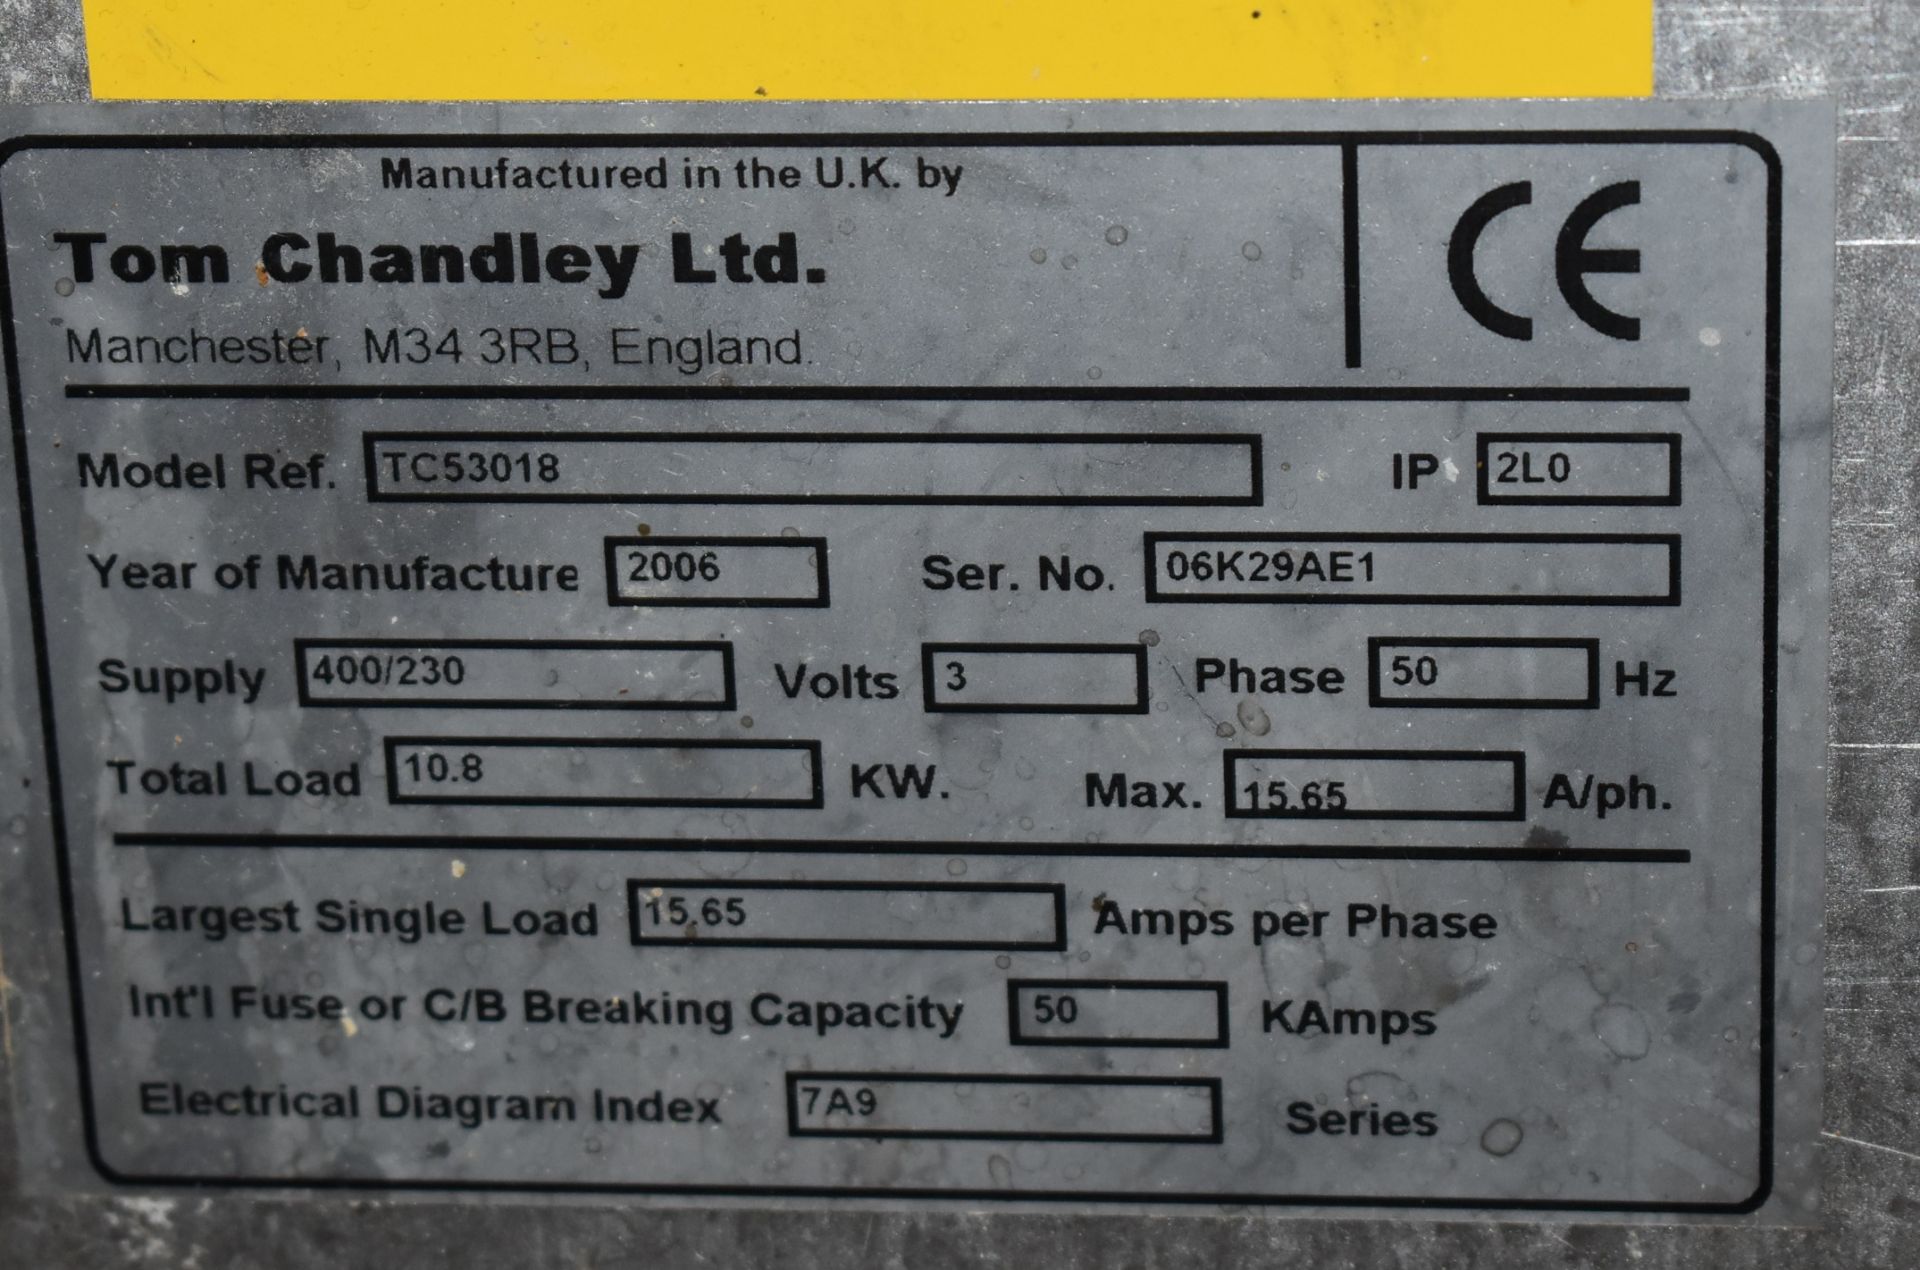 1 x Tom Chandley Double Door Bakery Oven - 3 Phase - Model TC53018 - Removed From Well Known - Image 3 of 3